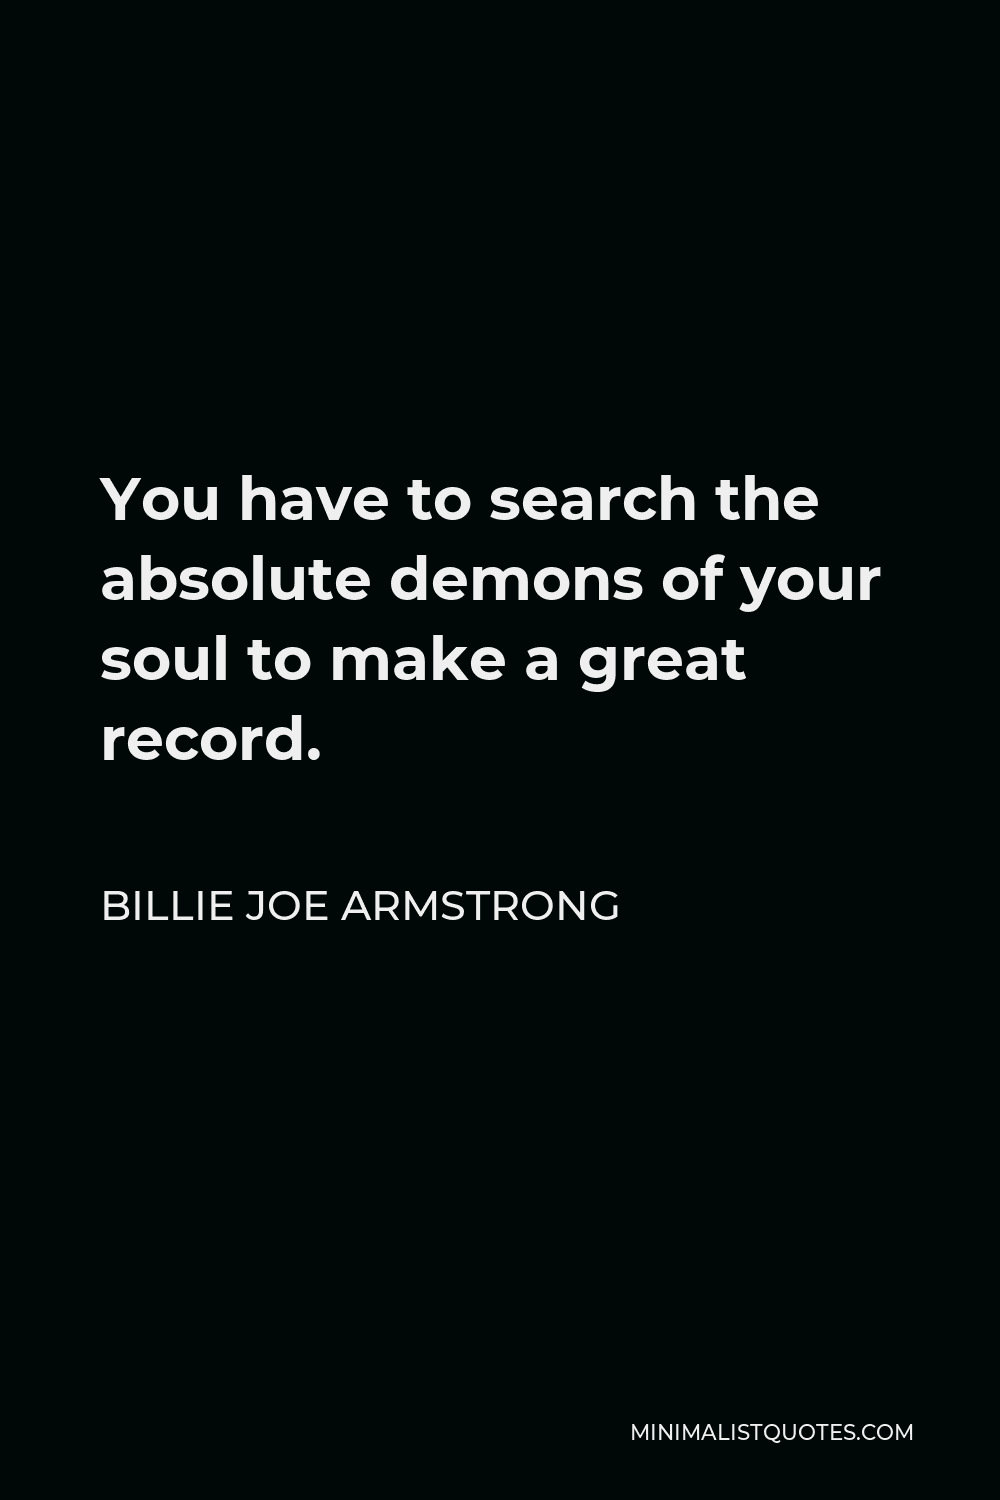 Billie Joe Armstrong Quote - You have to search the absolute demons of your soul to make a great record.